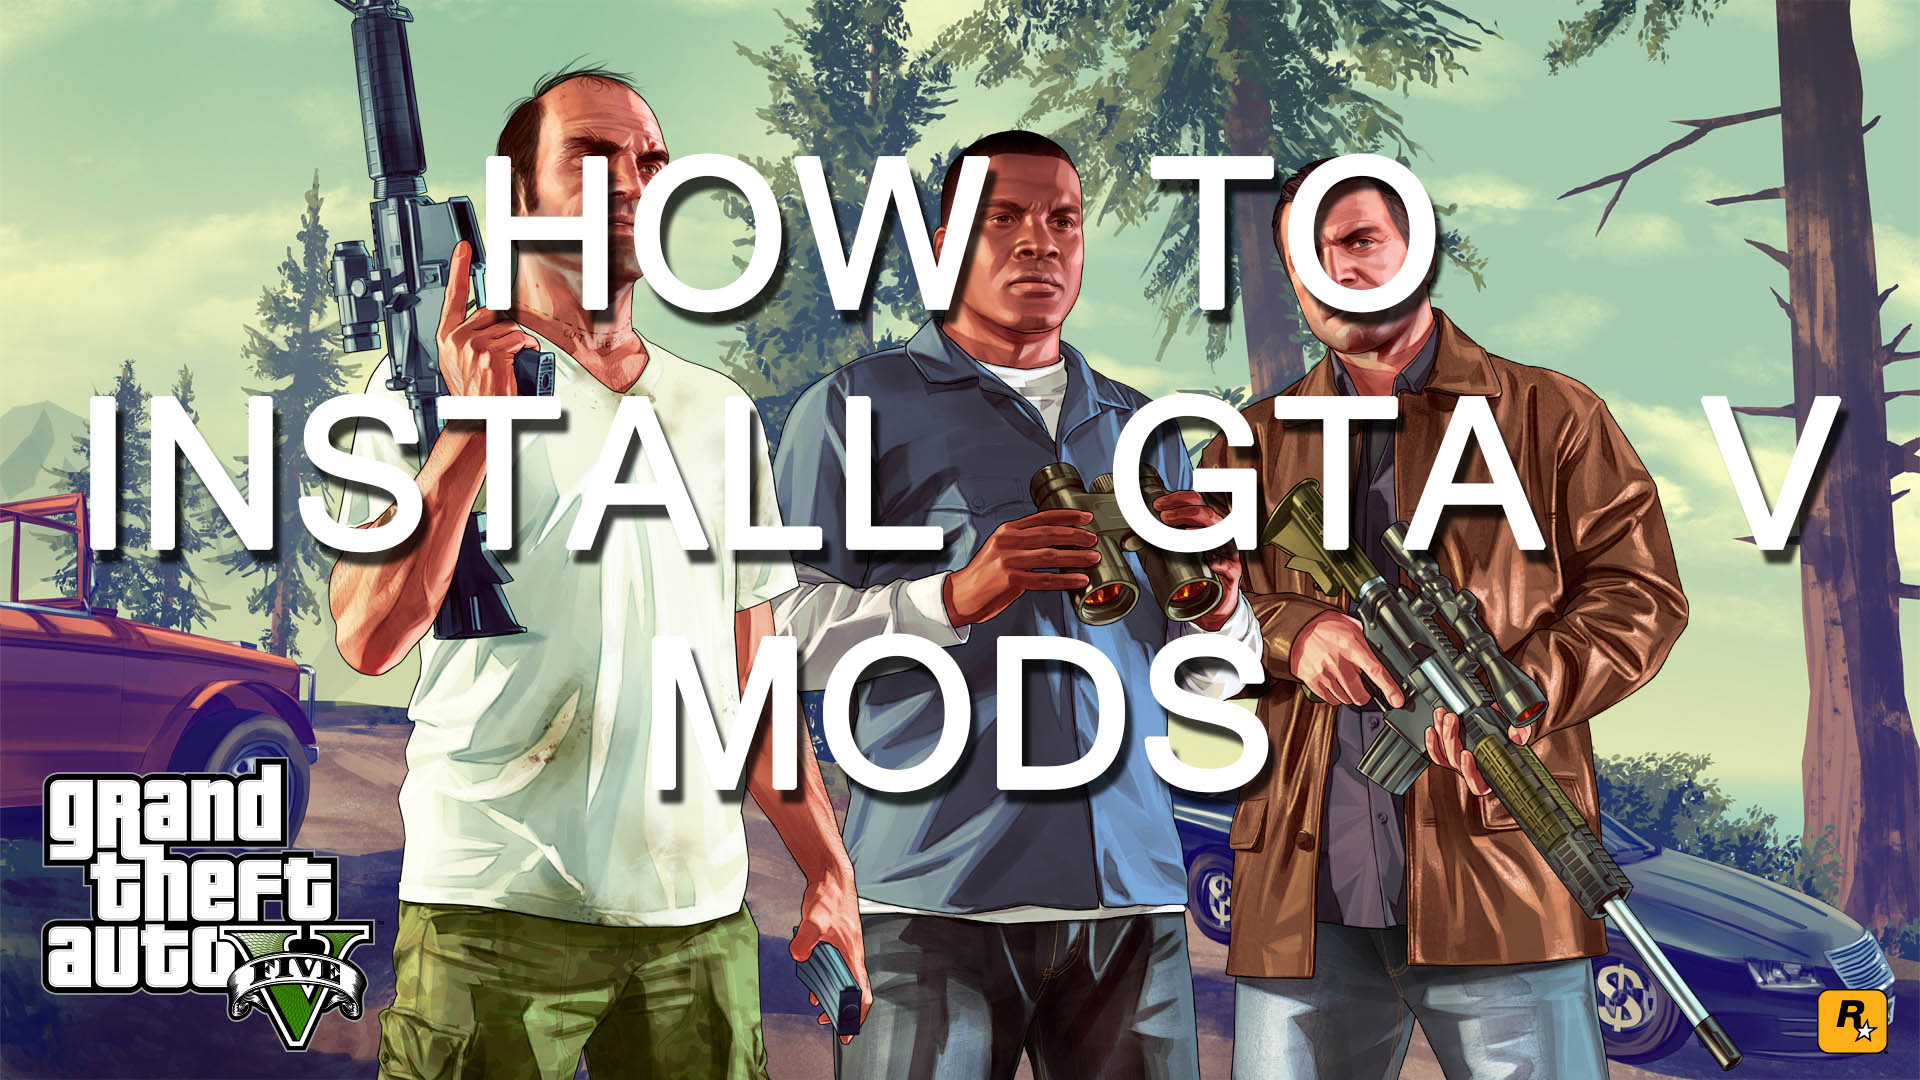 How to install Grand Theft Auto V mods on PC